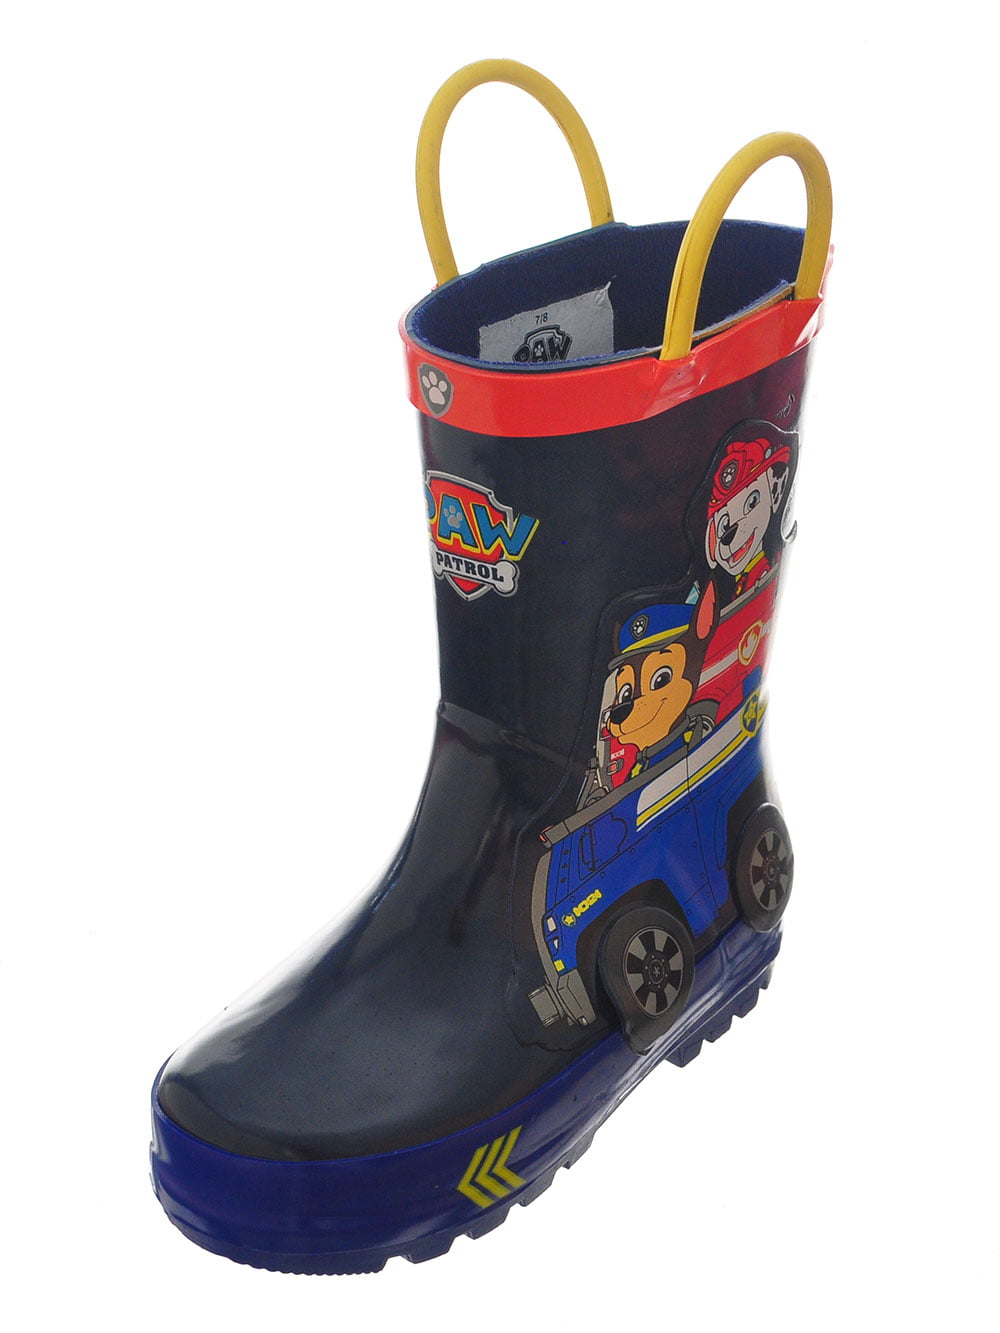 boots for boys walmart